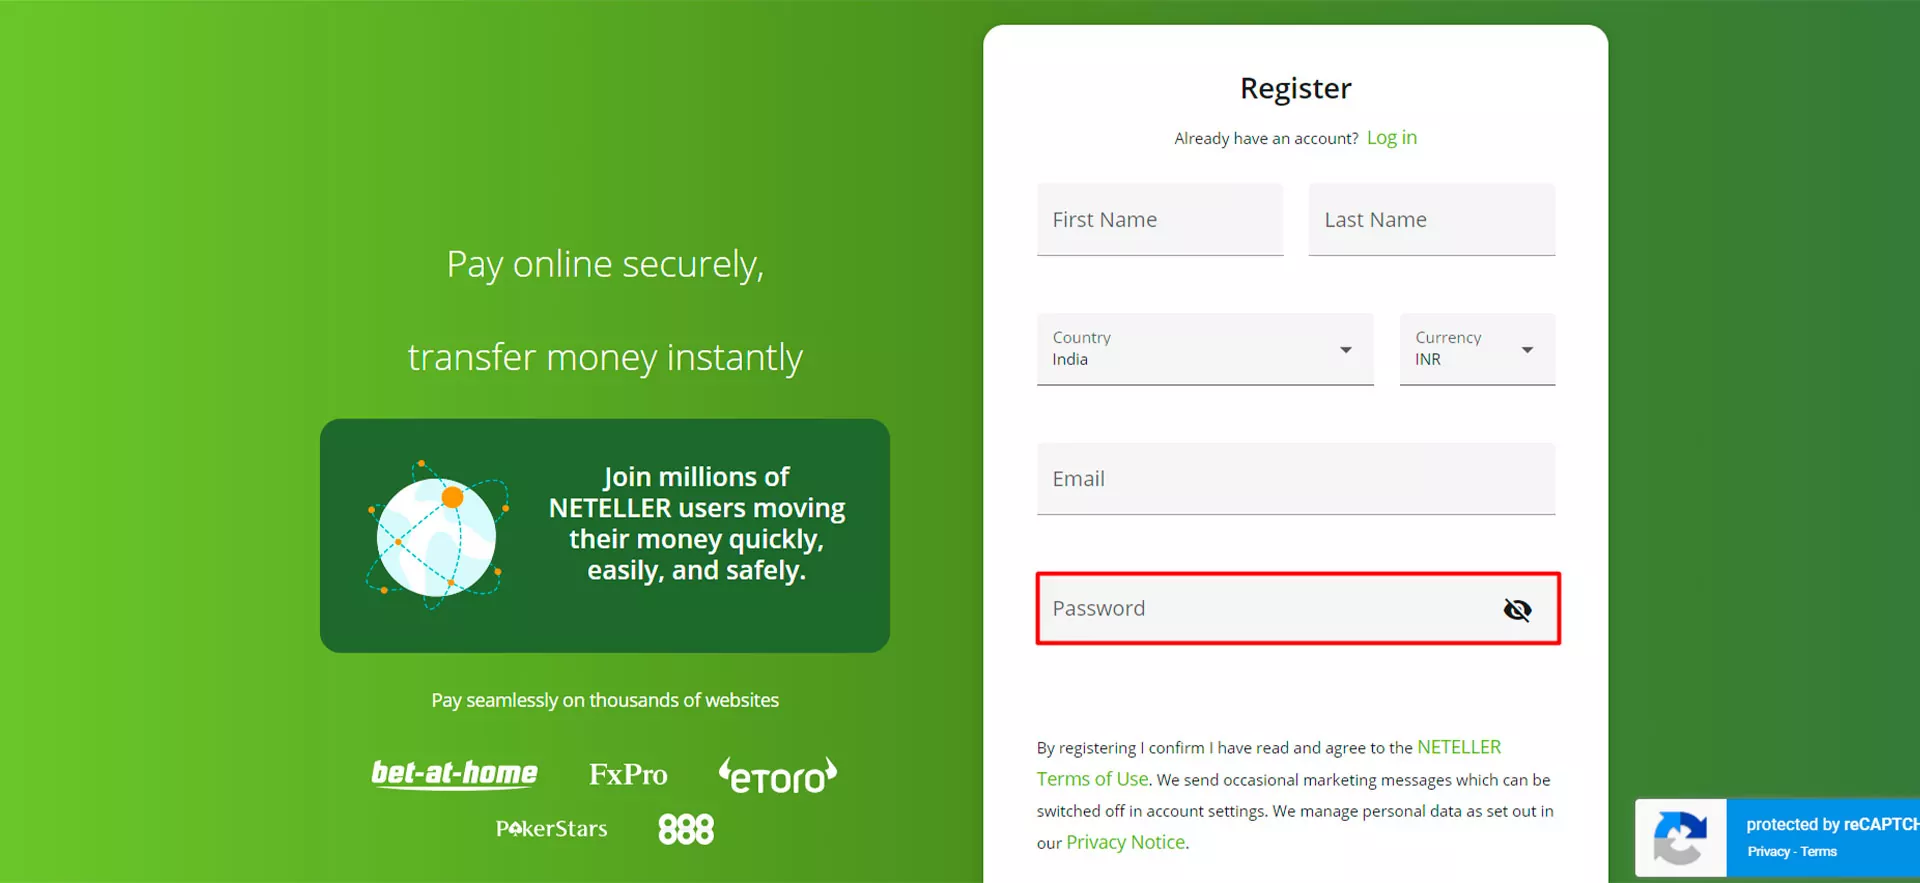 Do not forget your password to have an access to your Neteller account.